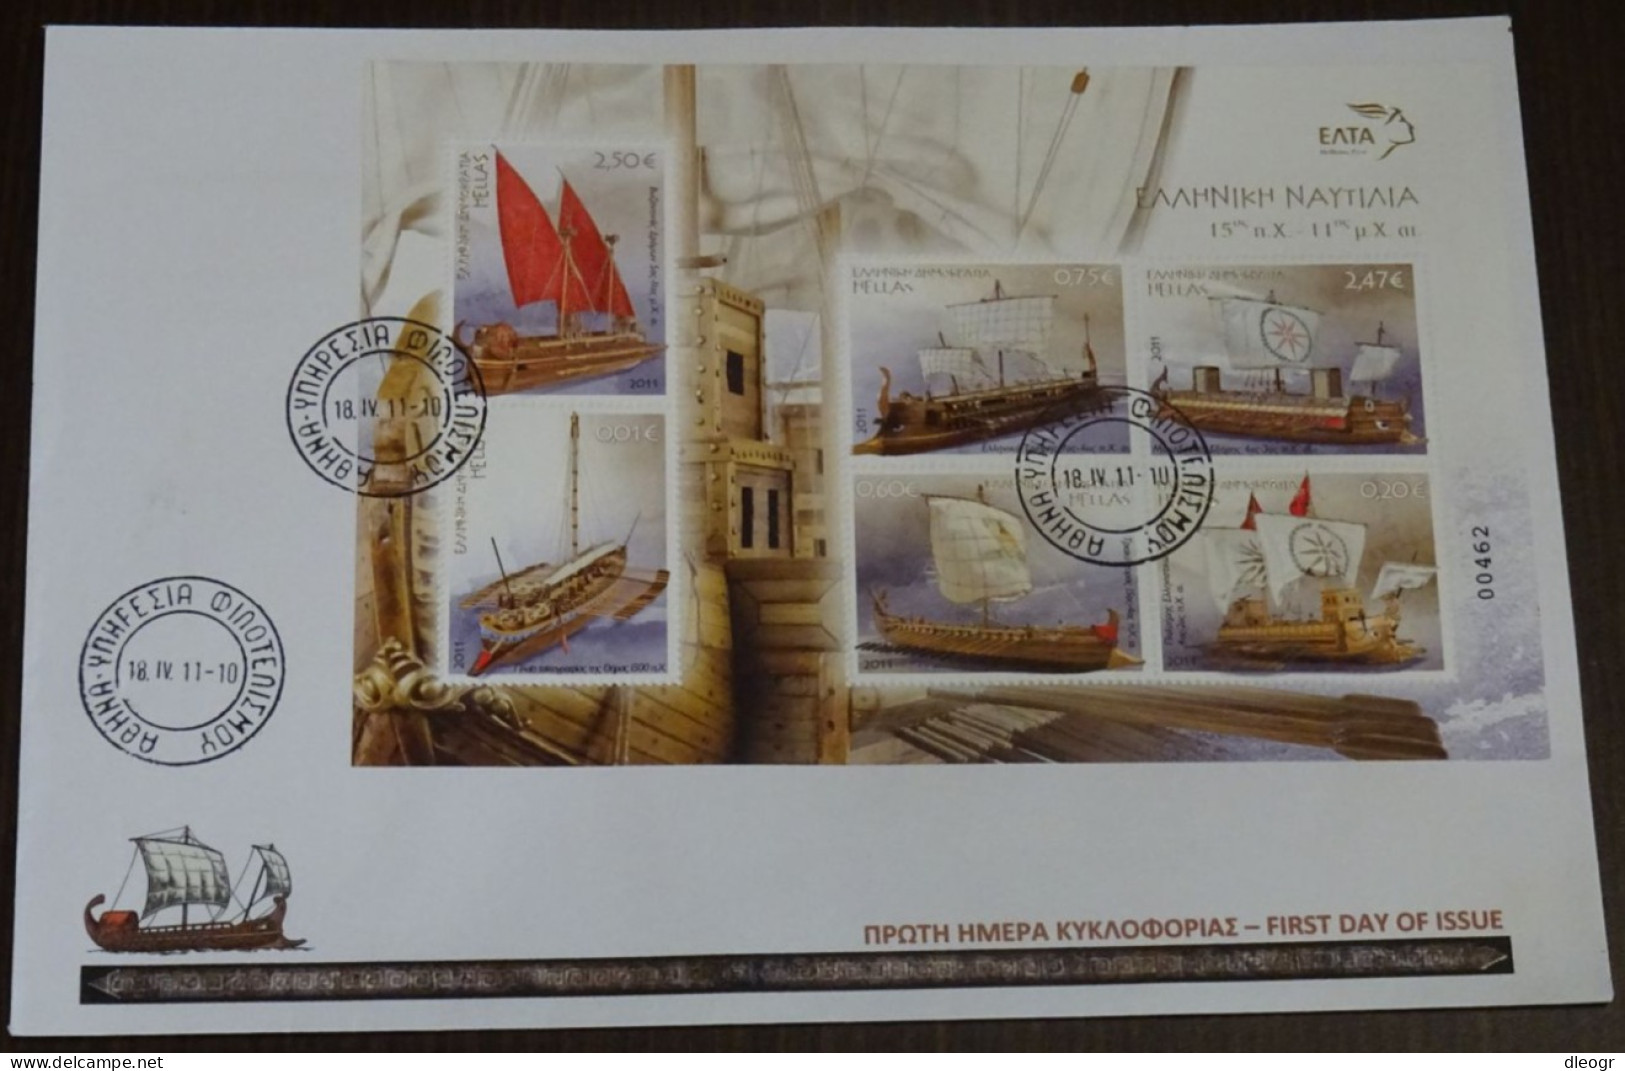 Greece 2011 Greek Shipping Block Unofficial FDC - FDC